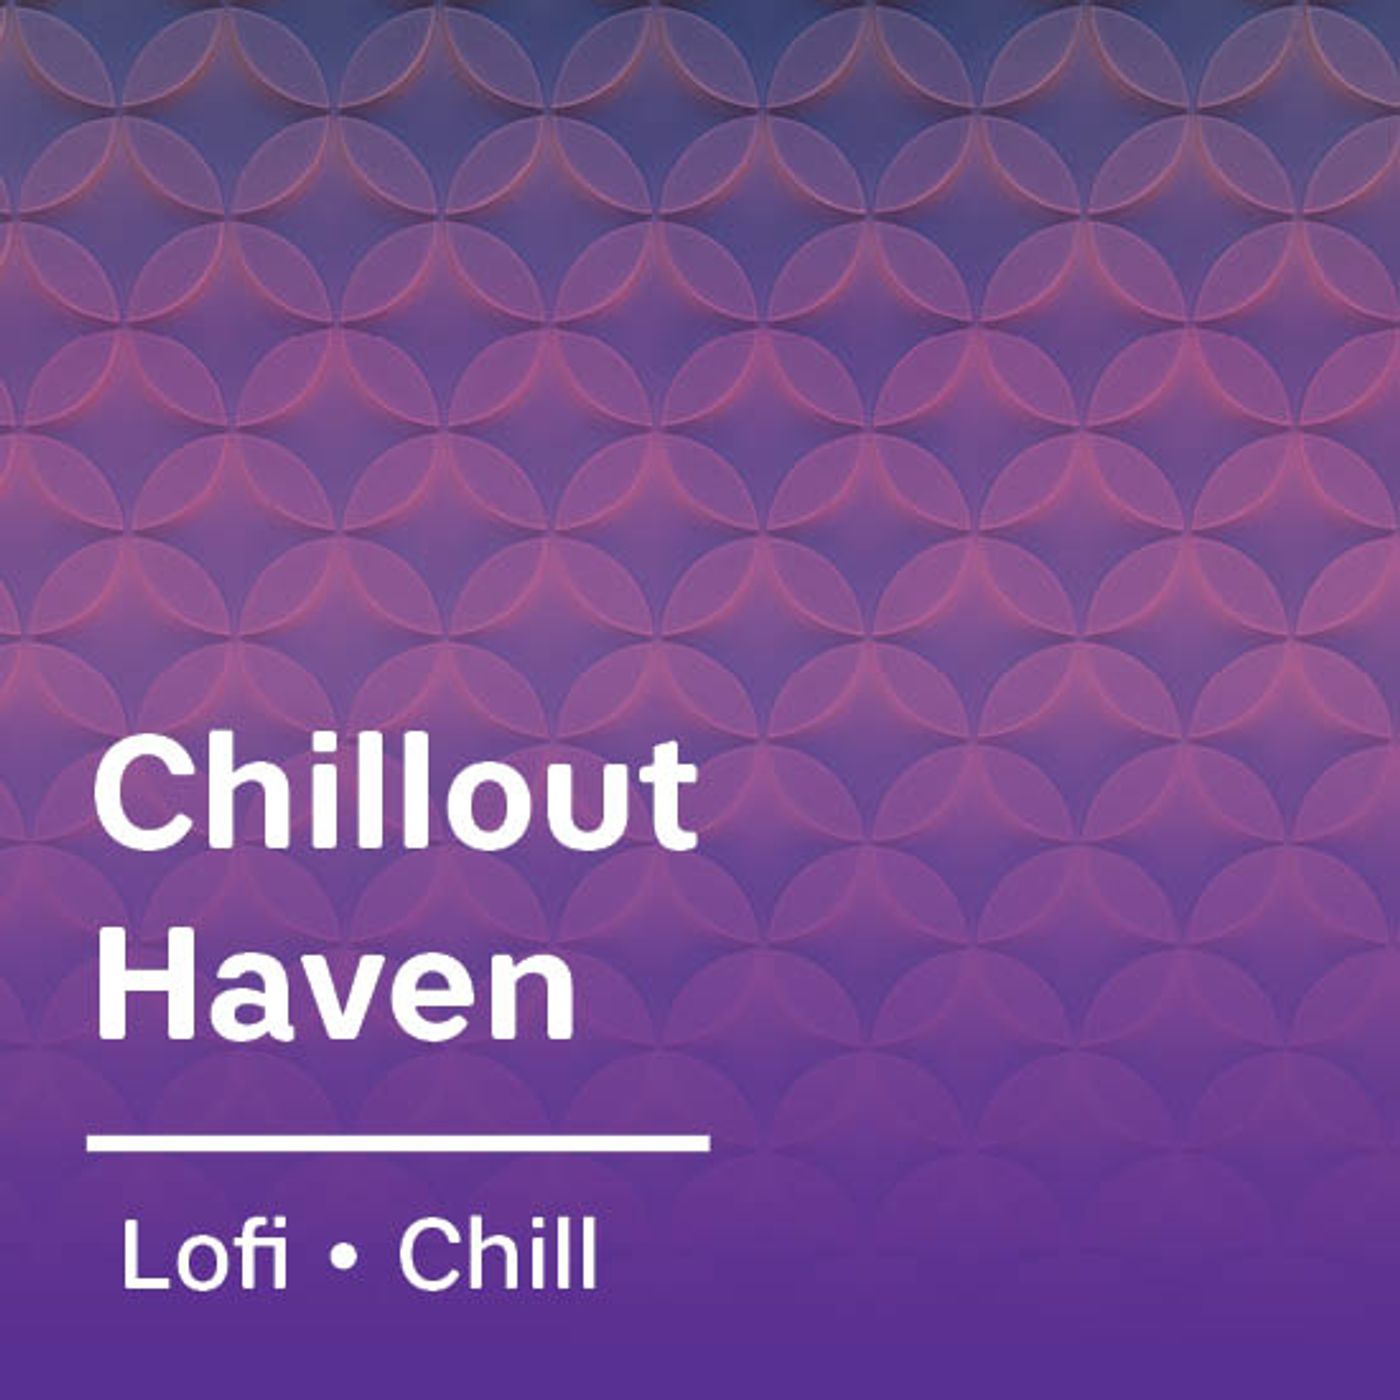 Chillout Haven